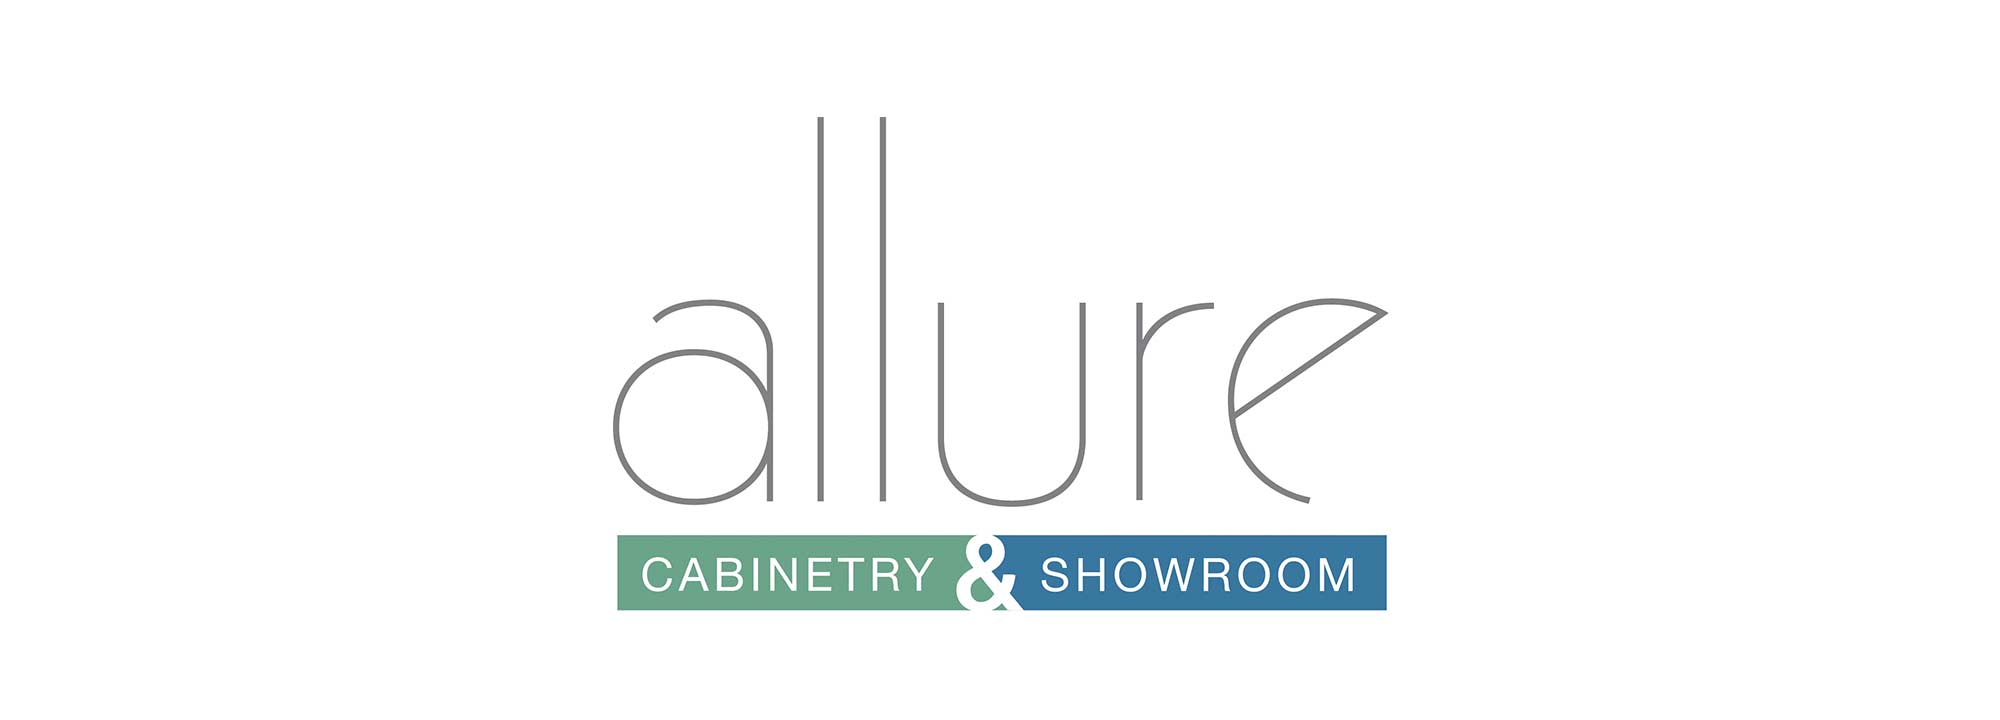 Allure Cabinetry & Showroom Logo